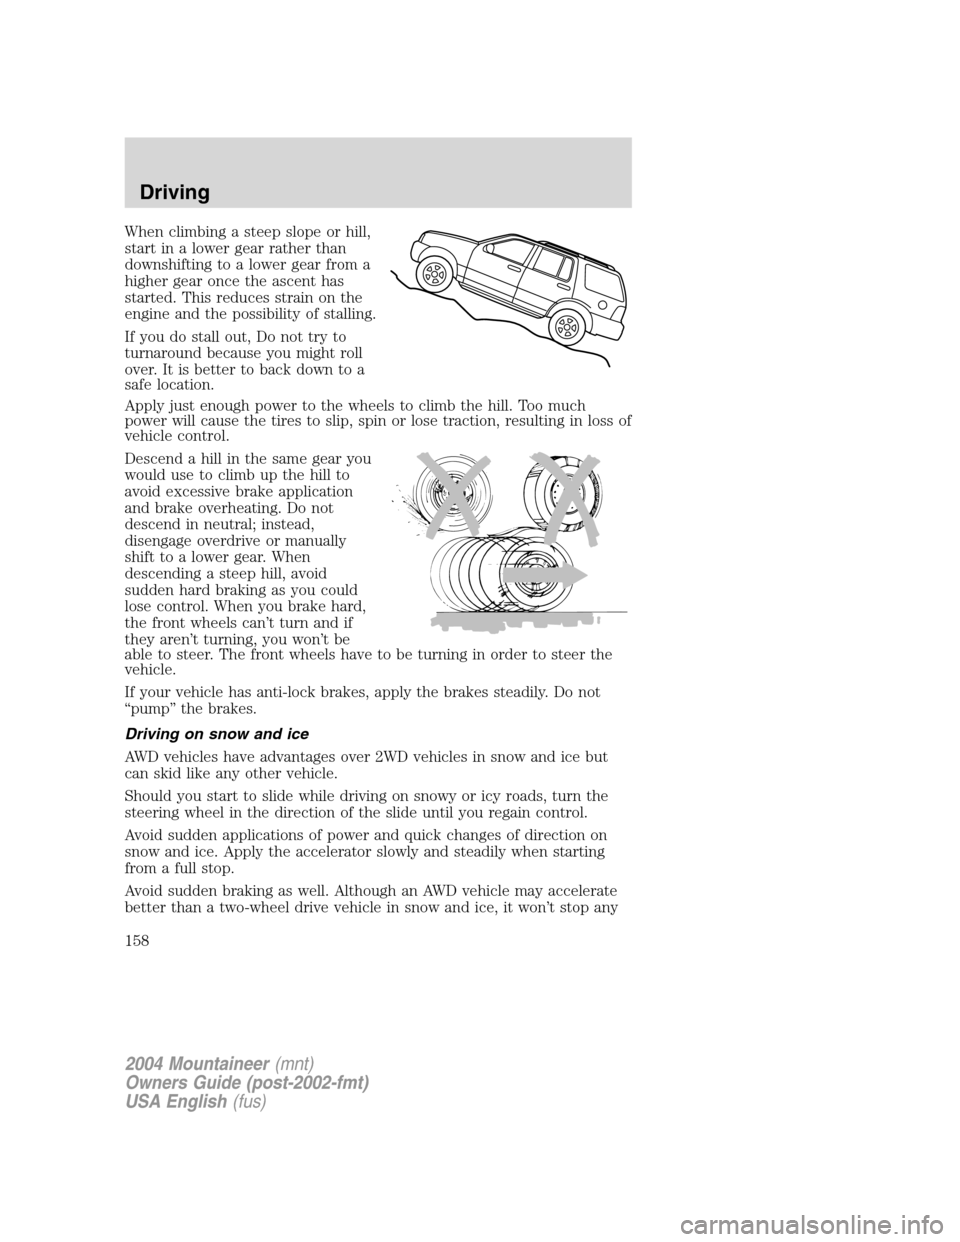 Mercury Mountaineer 2004  Owners Manuals When climbing a steep slope or hill,
start in a lower gear rather than
downshifting to a lower gear from a
higher gear once the ascent has
started. This reduces strain on the
engine and the possibilit